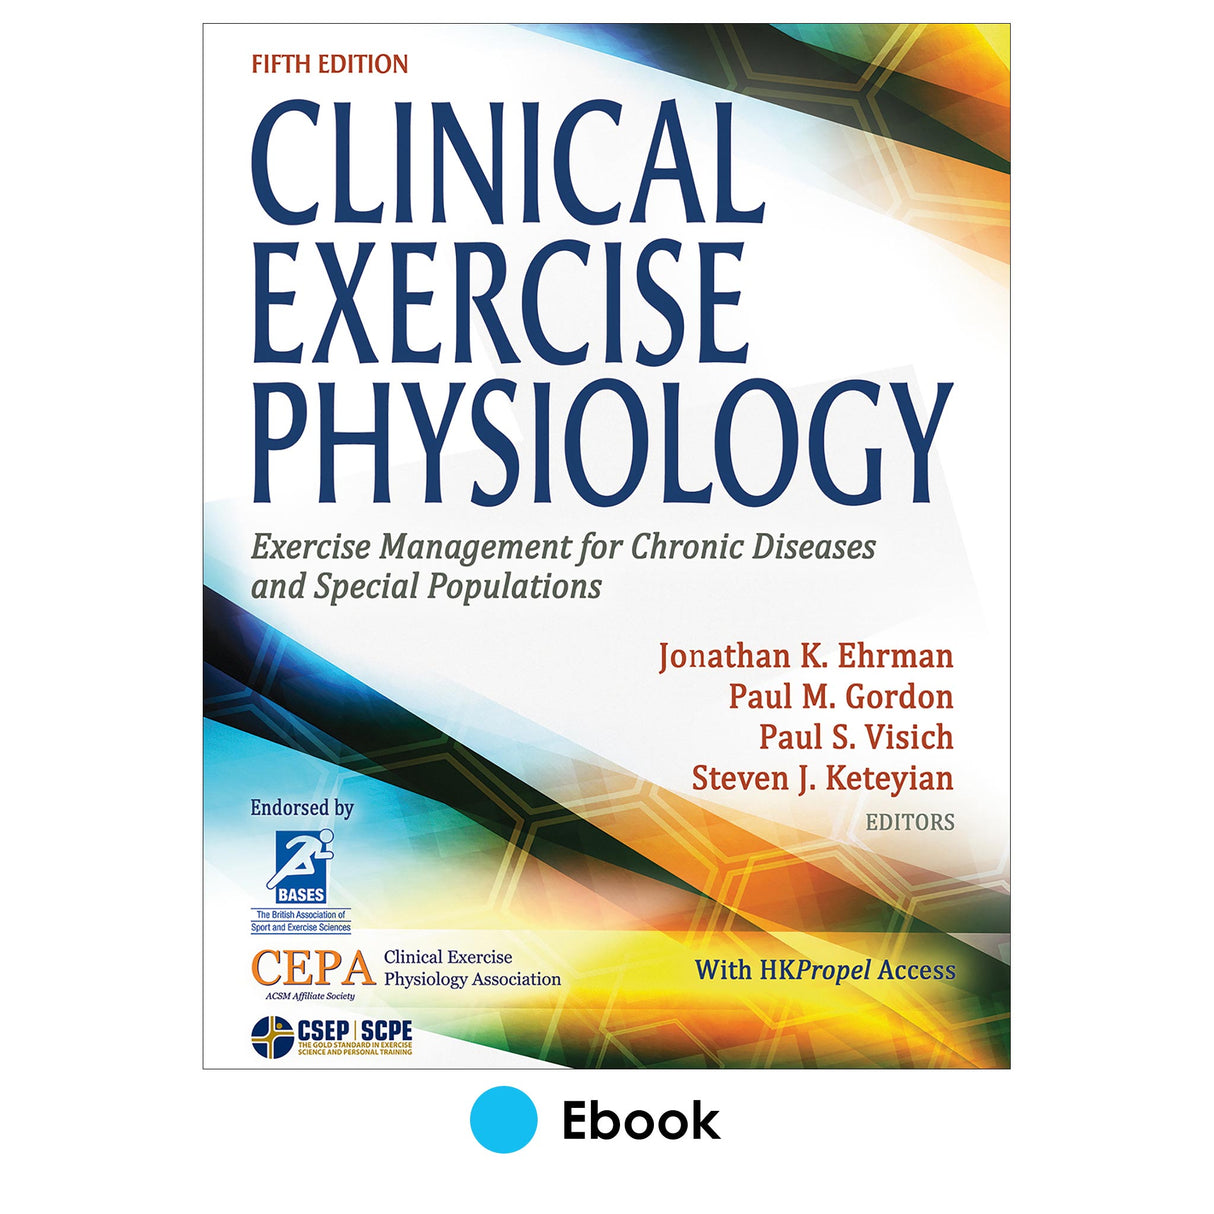 Clinical Exercise Physiology 5th Edition Ebook With HKPropel Access